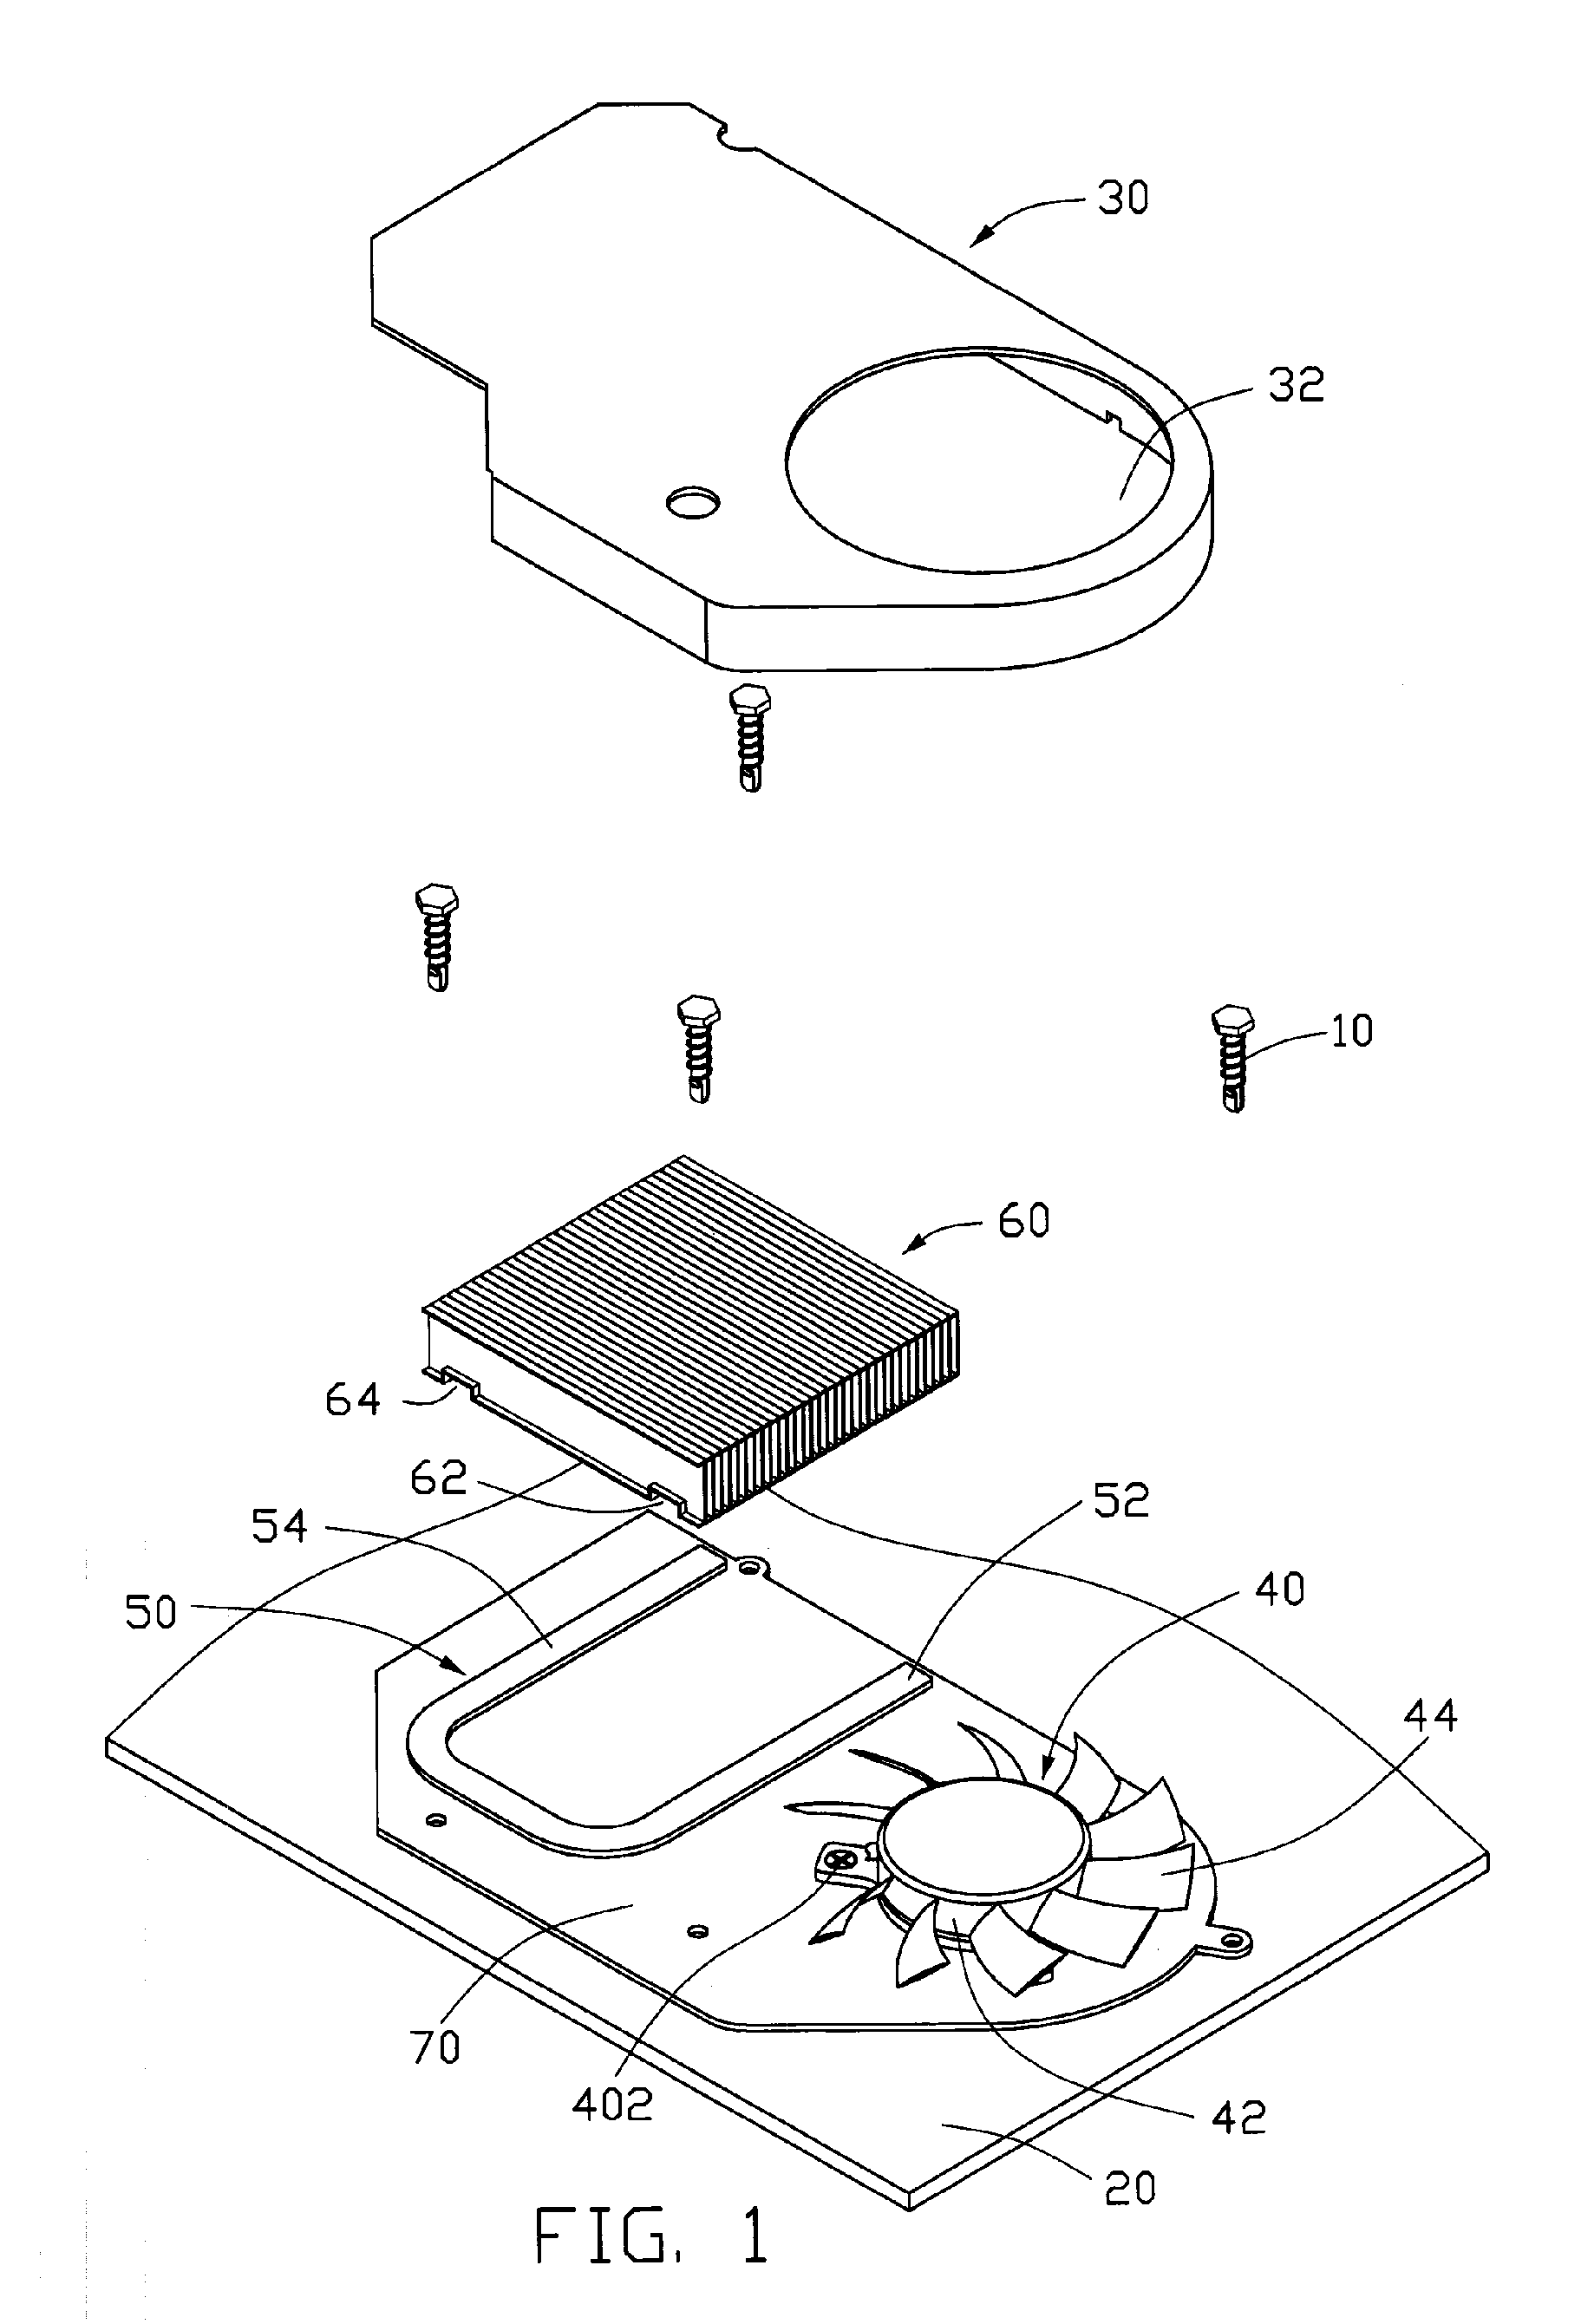 Heat dissipating apparatus for computer add-on cards